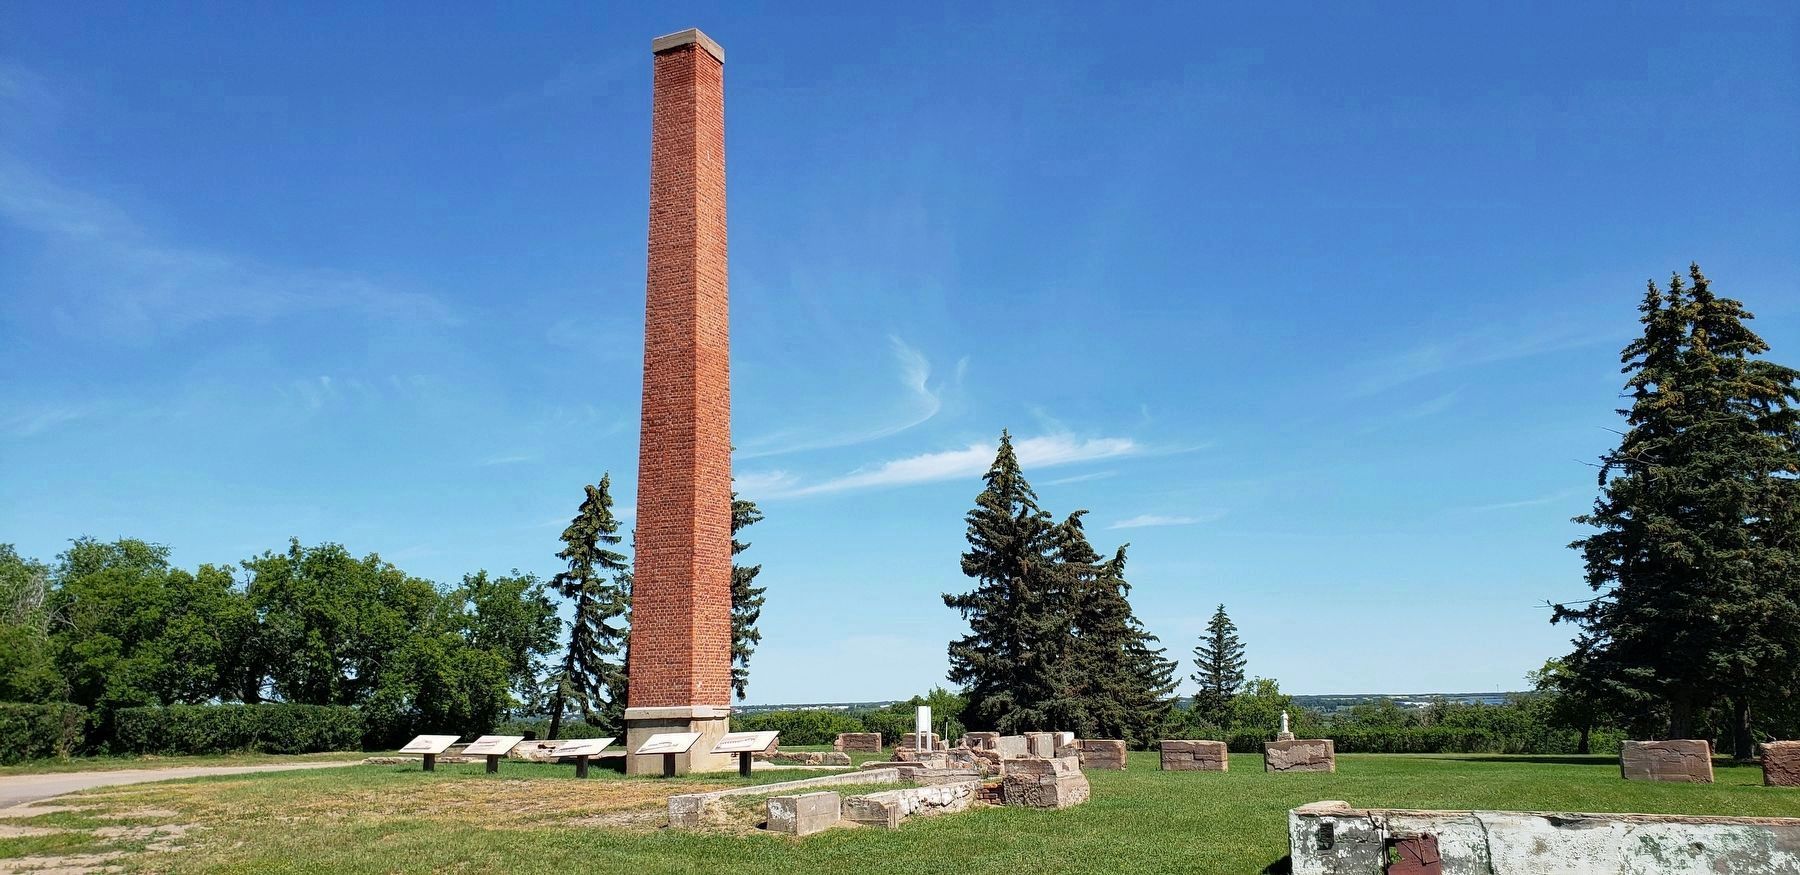 Old Government House Chimney, Markers & Ruins image. Click for full size.